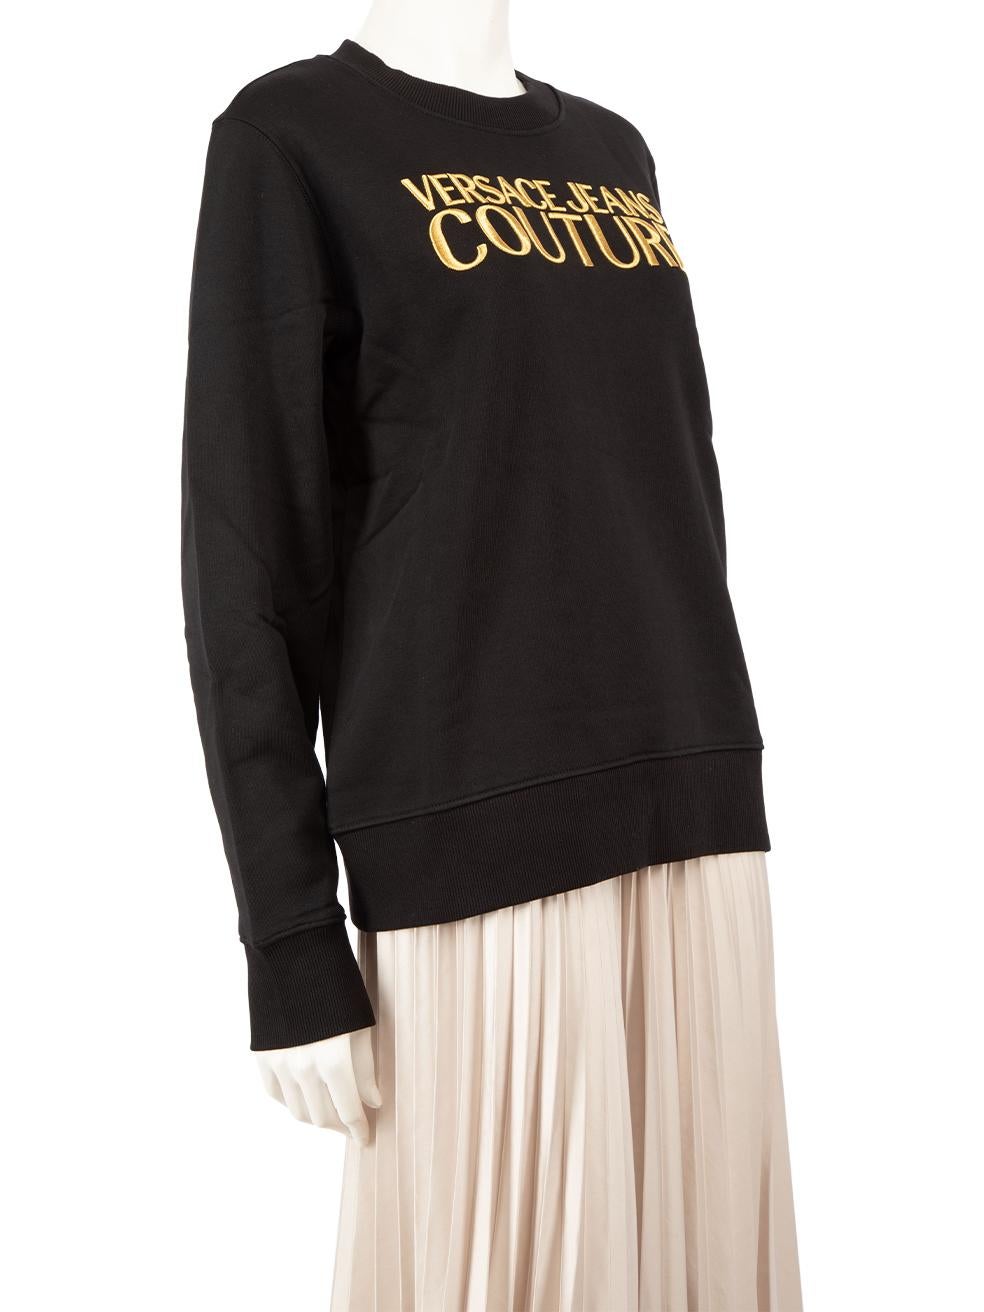 CONDITION is New with tags on this brand new Versace designer item. This item comes with original packaging.
 
 
 
 Details
 
 
 Model: E71HAIT01
 
 Season: FW23
 
 Black
 
 Cotton
 
 Sweatshirt
 
 Long sleeves
 
 Slim fit
 
 Round neck
 
 Gold